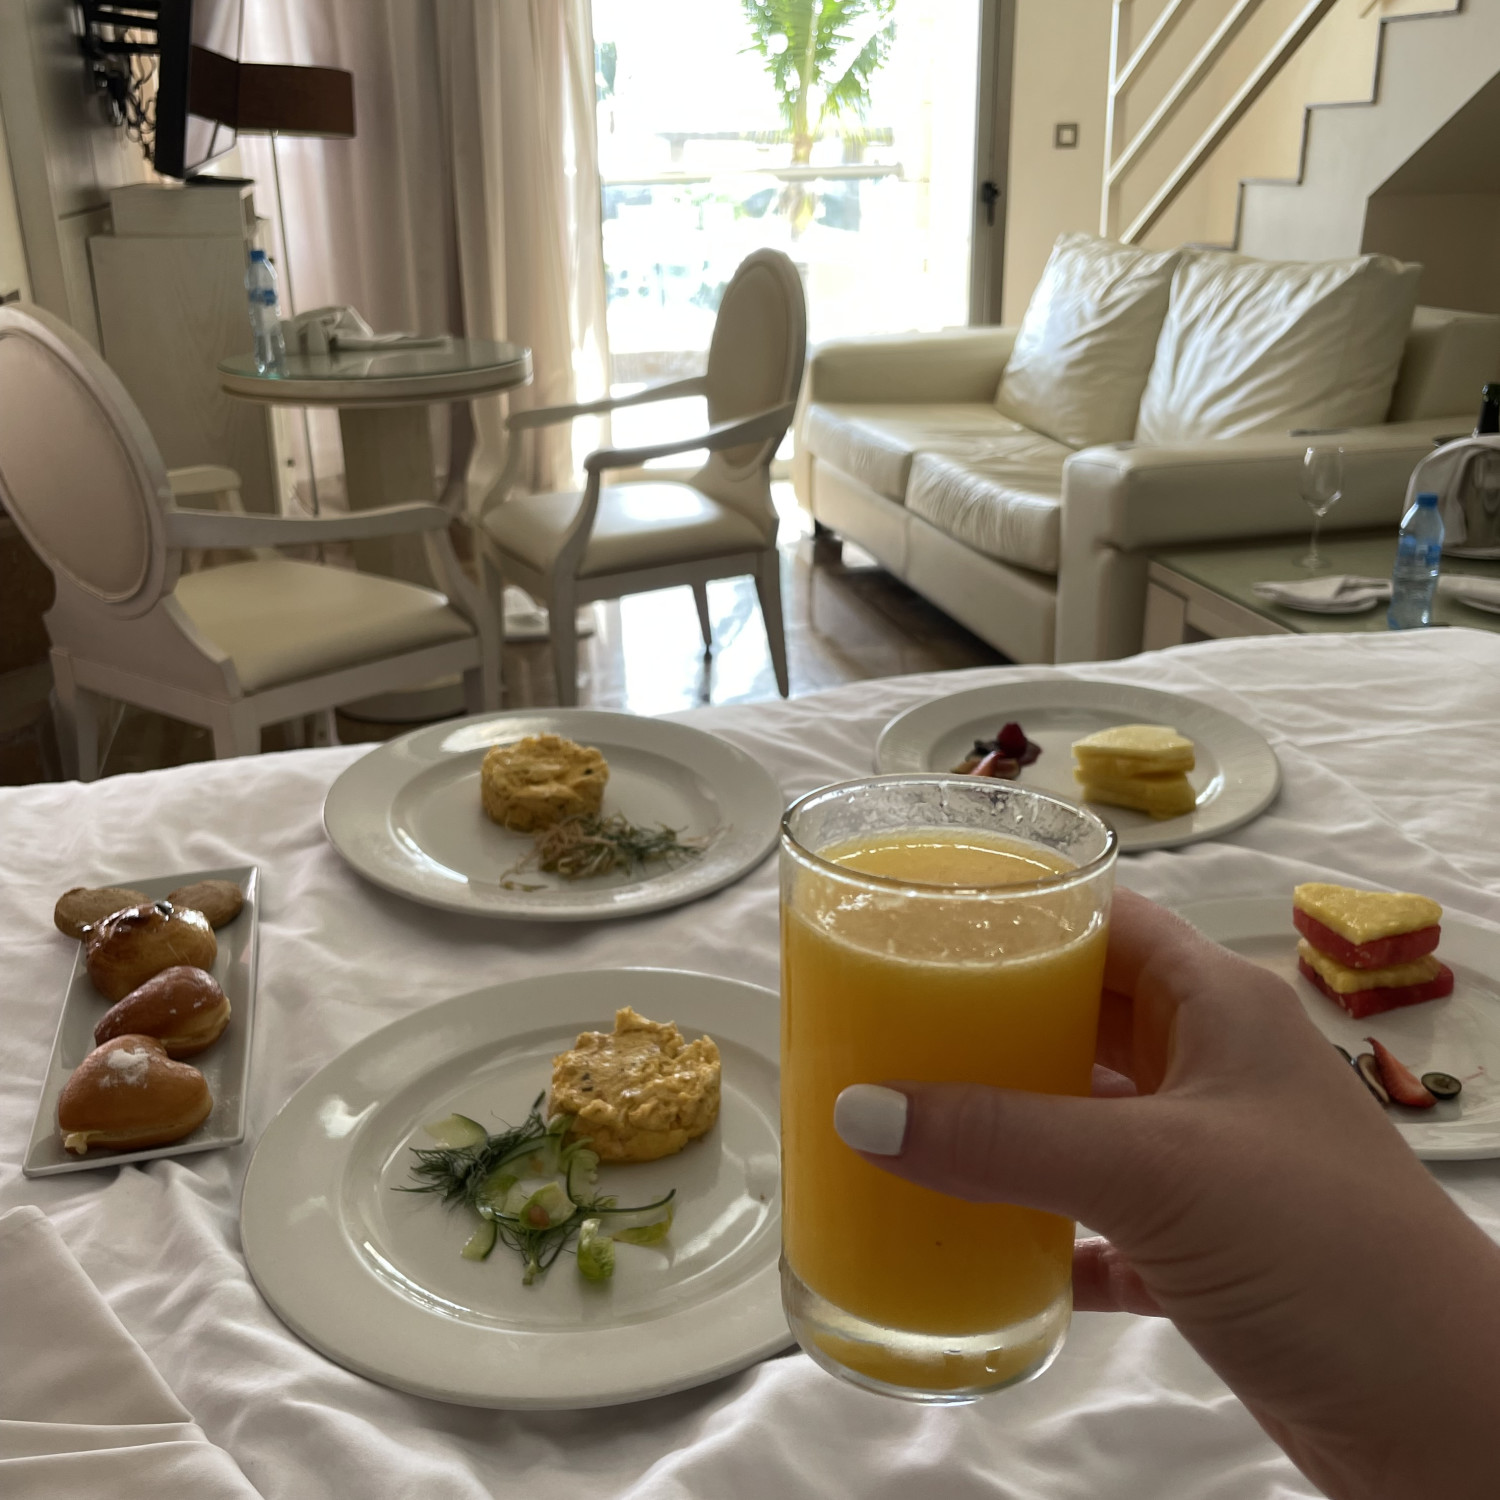 View of juice and snacks